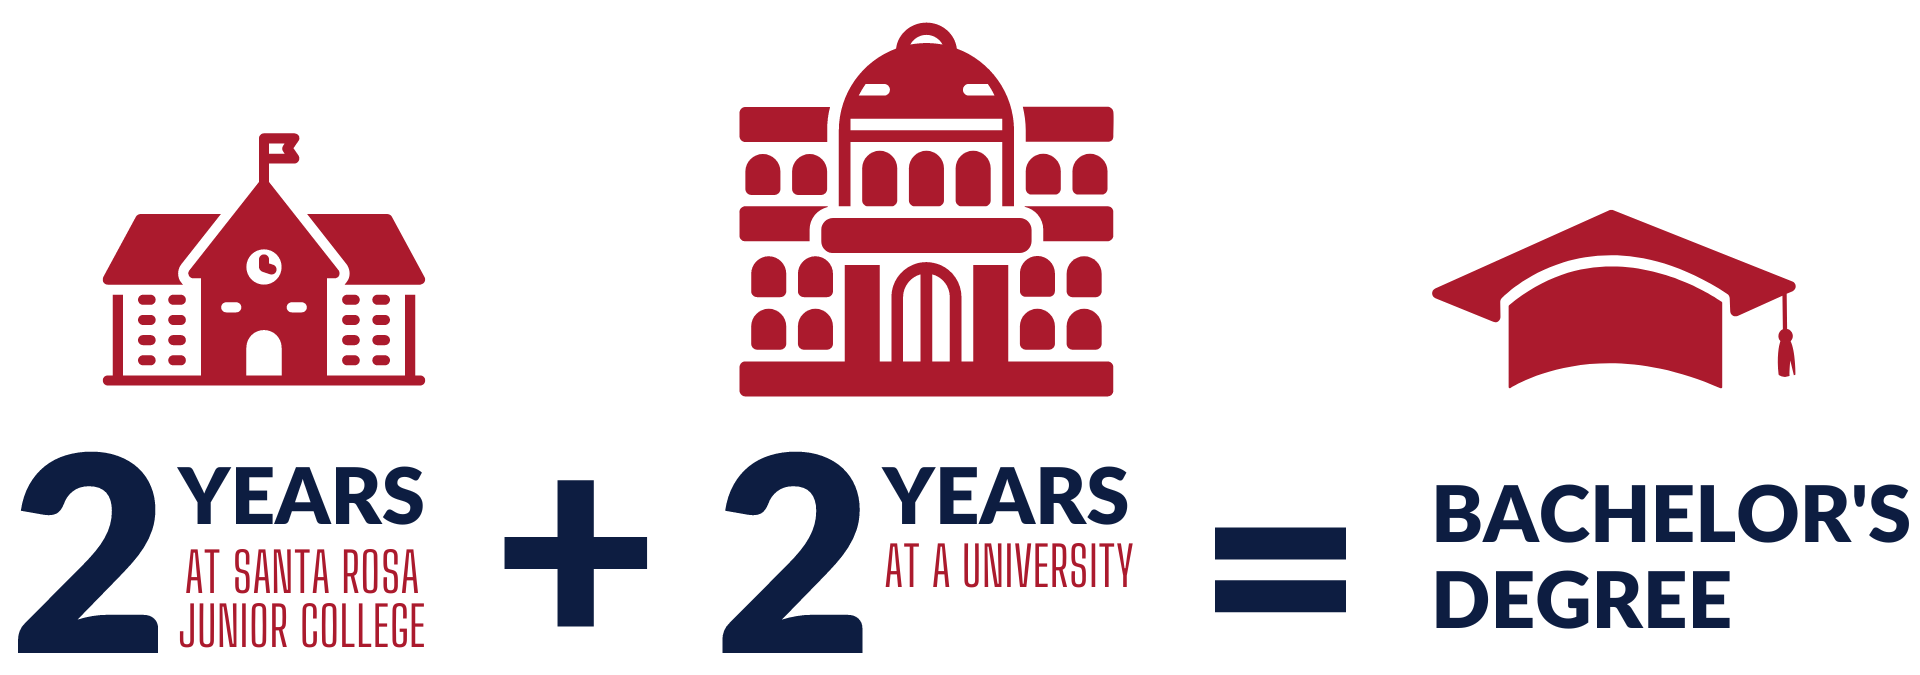 Decorative graphic illustrating the transition from SRJC to university.